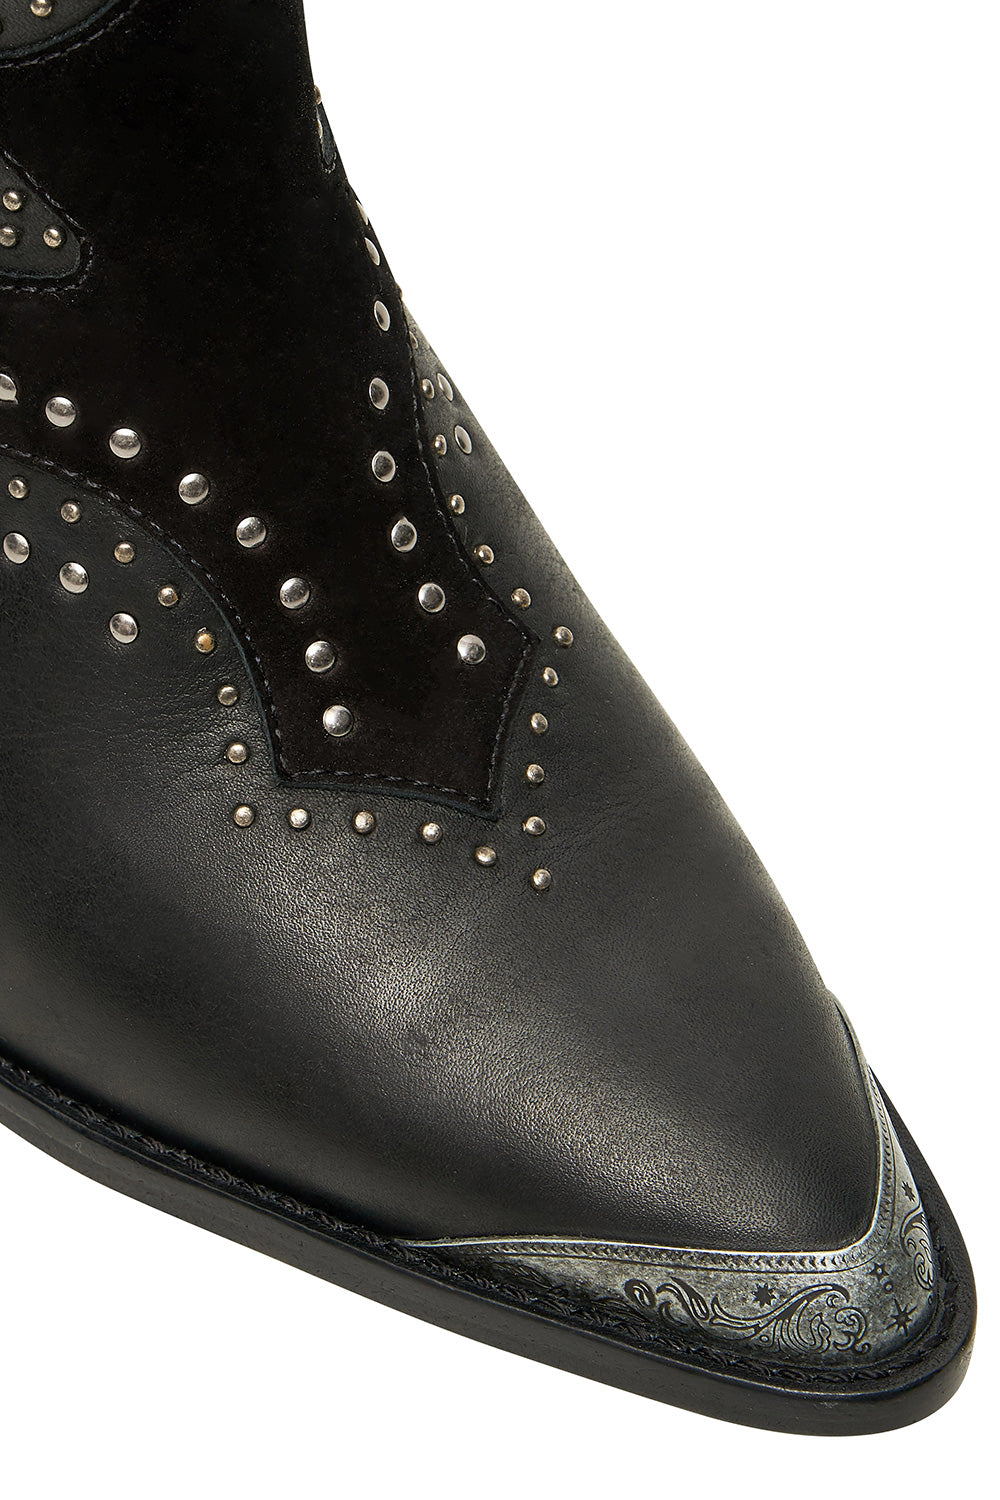 OUTBACK ANKLE BOOT SOLID BLACK